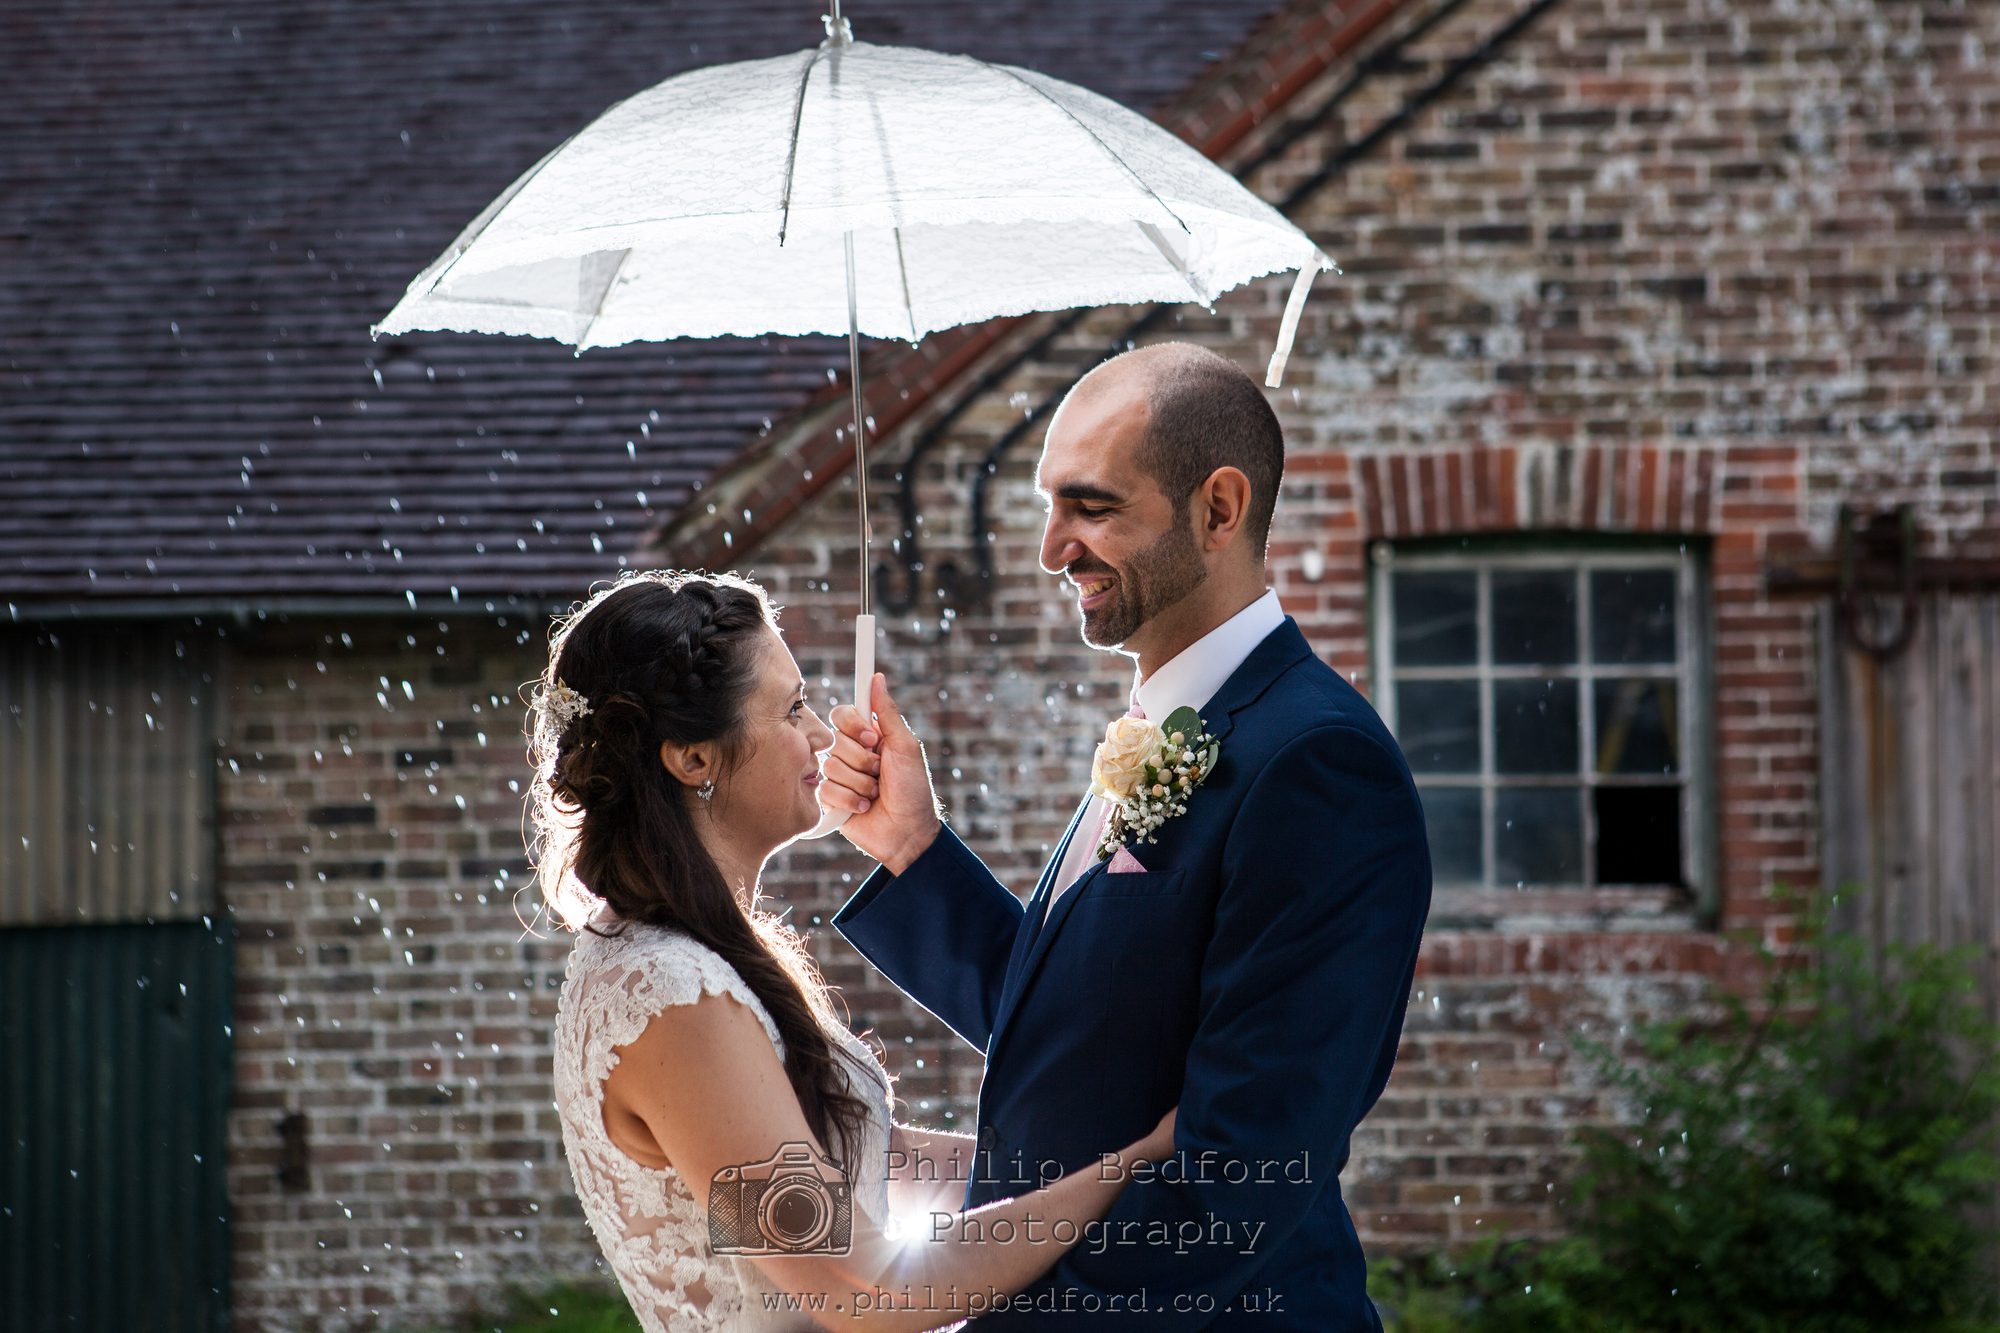 Preview Sam  Laura Wedding Chapel Barn Sussex